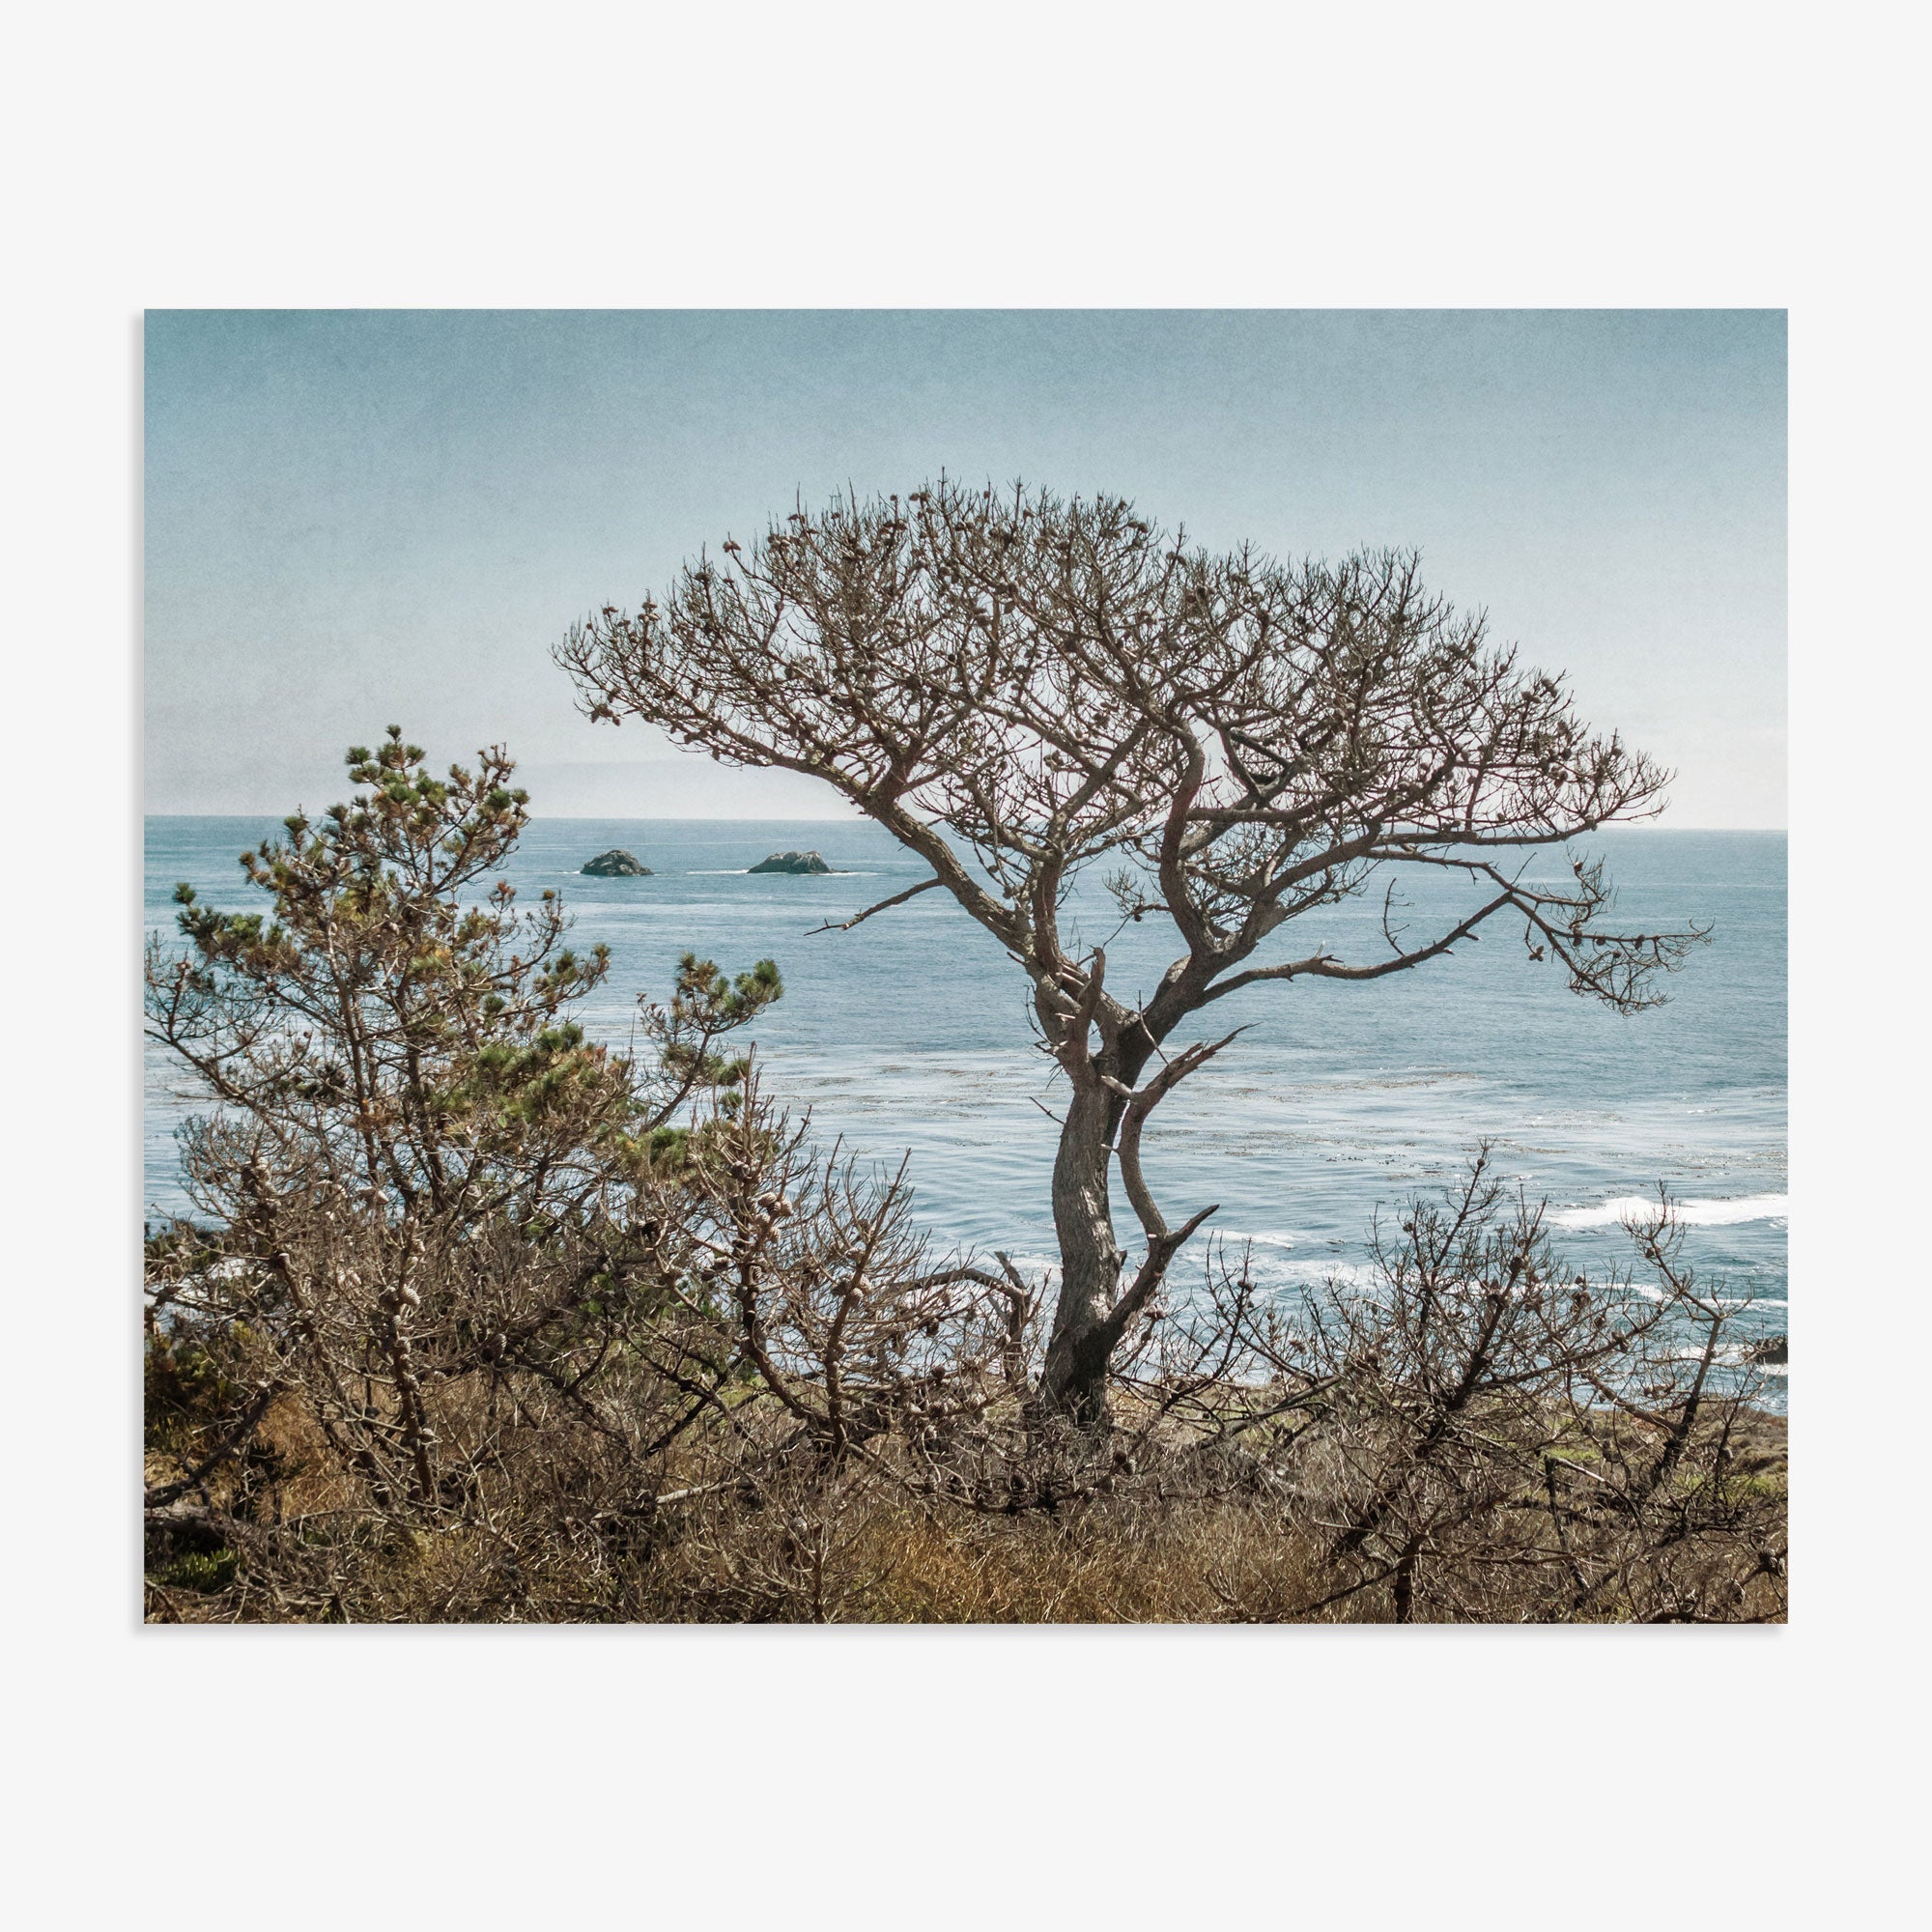 A picturesque view of a weathered, solitary tree with a thick trunk and sprawling branches, captured in Offley Green&#39;s California Landscape Art in Big Sur, &#39;Wind Blown Tree&#39;, set against a backdrop of a calm ocean and clear sky. Green foliage and smaller